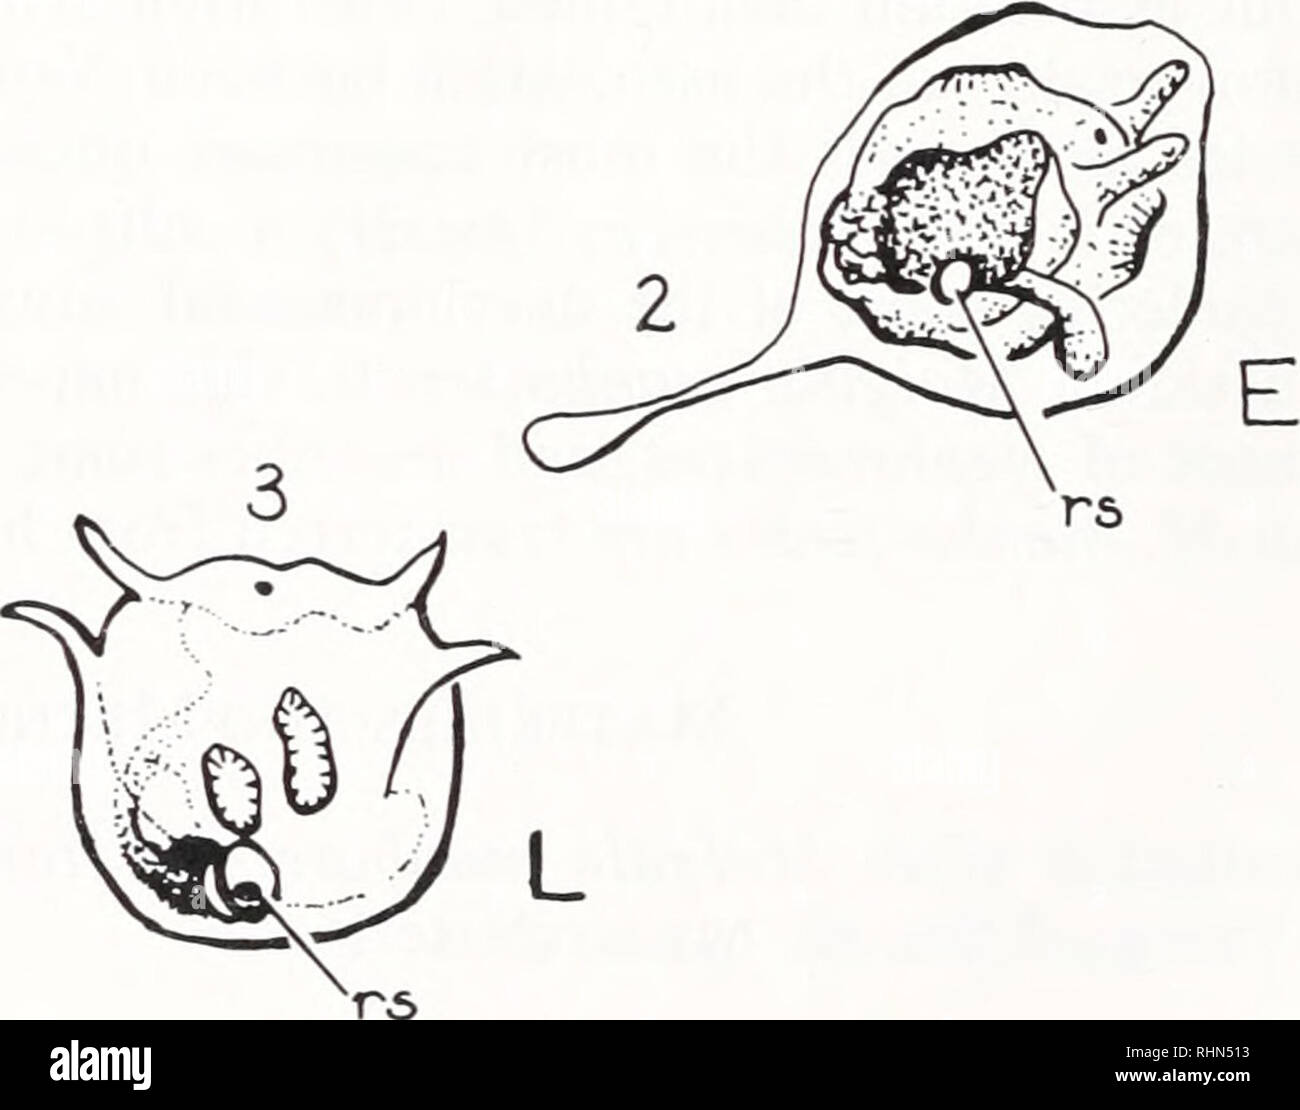 . The Biological bulletin. Biology; Zoology; Biology; Marine Biology. FIGURE 1. Inoculation of Molgula with Nephromyces before (&quot;early&quot;: E) and after (&quot;late&quot;: L, L') initiation of feeding. 1: tadpole larva; 2: settled, metamorphosing zooid (renal sac present, feeding organs not functional); 3: feeding zooid (5-7 days after fertilization); 4: zooid several months after fertilization; 5: sexually mature adult, rs, renal sac. Drawings not to scale.. Please note that these images are extracted from scanned page images that may have been digitally enhanced for readability - colo Stock Photo